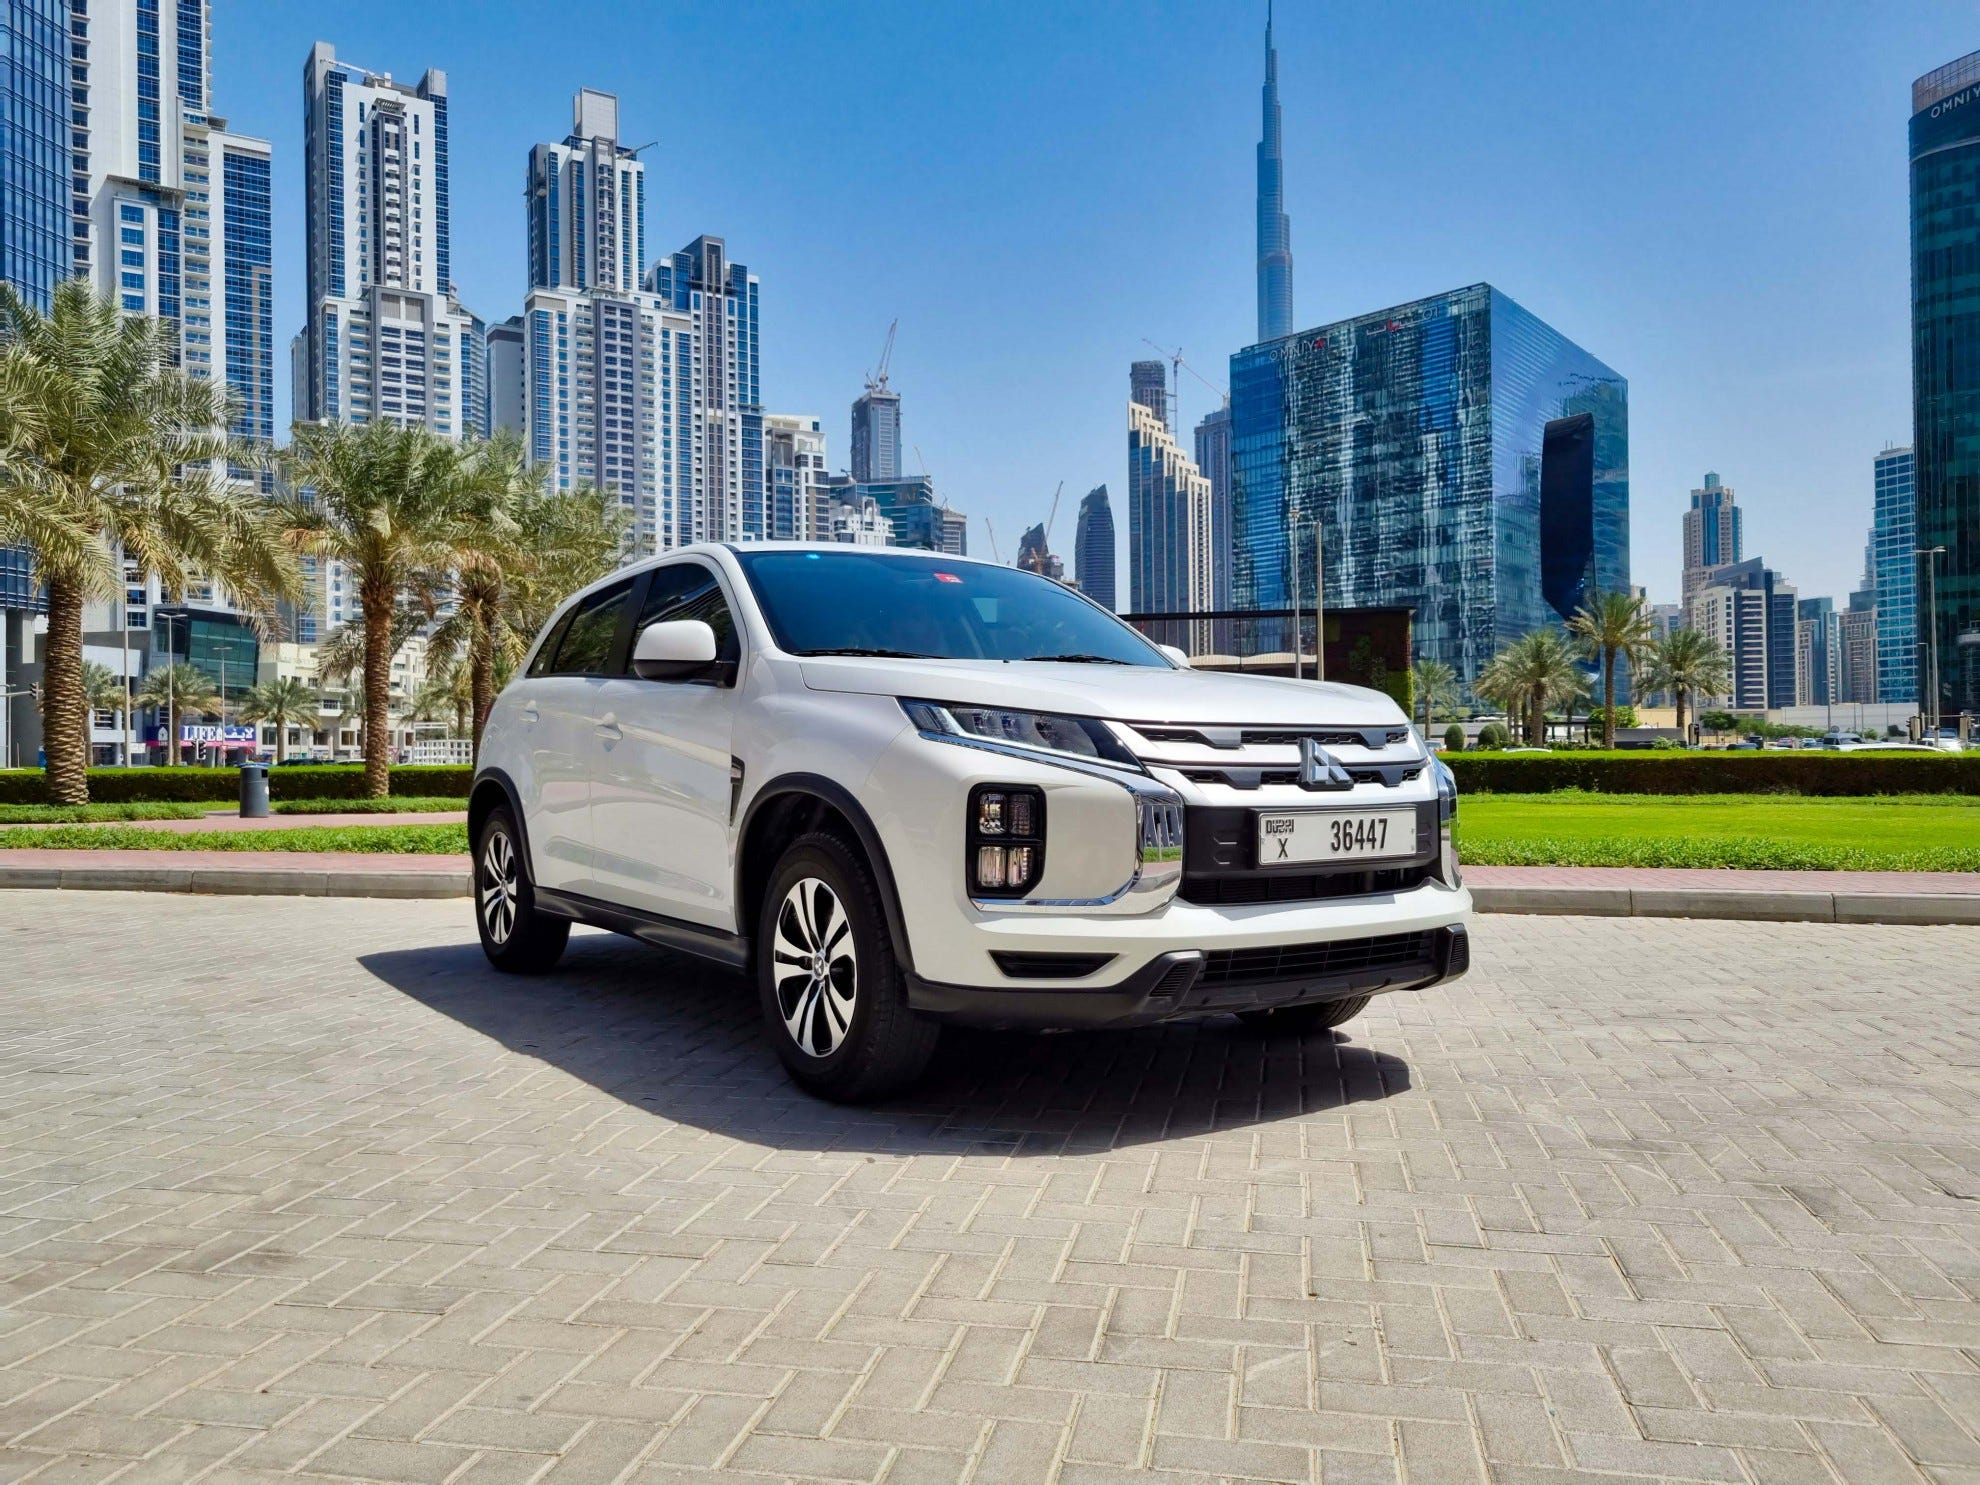 Experience a Seamless Journey from Dubai Airport with Car Rental Servi